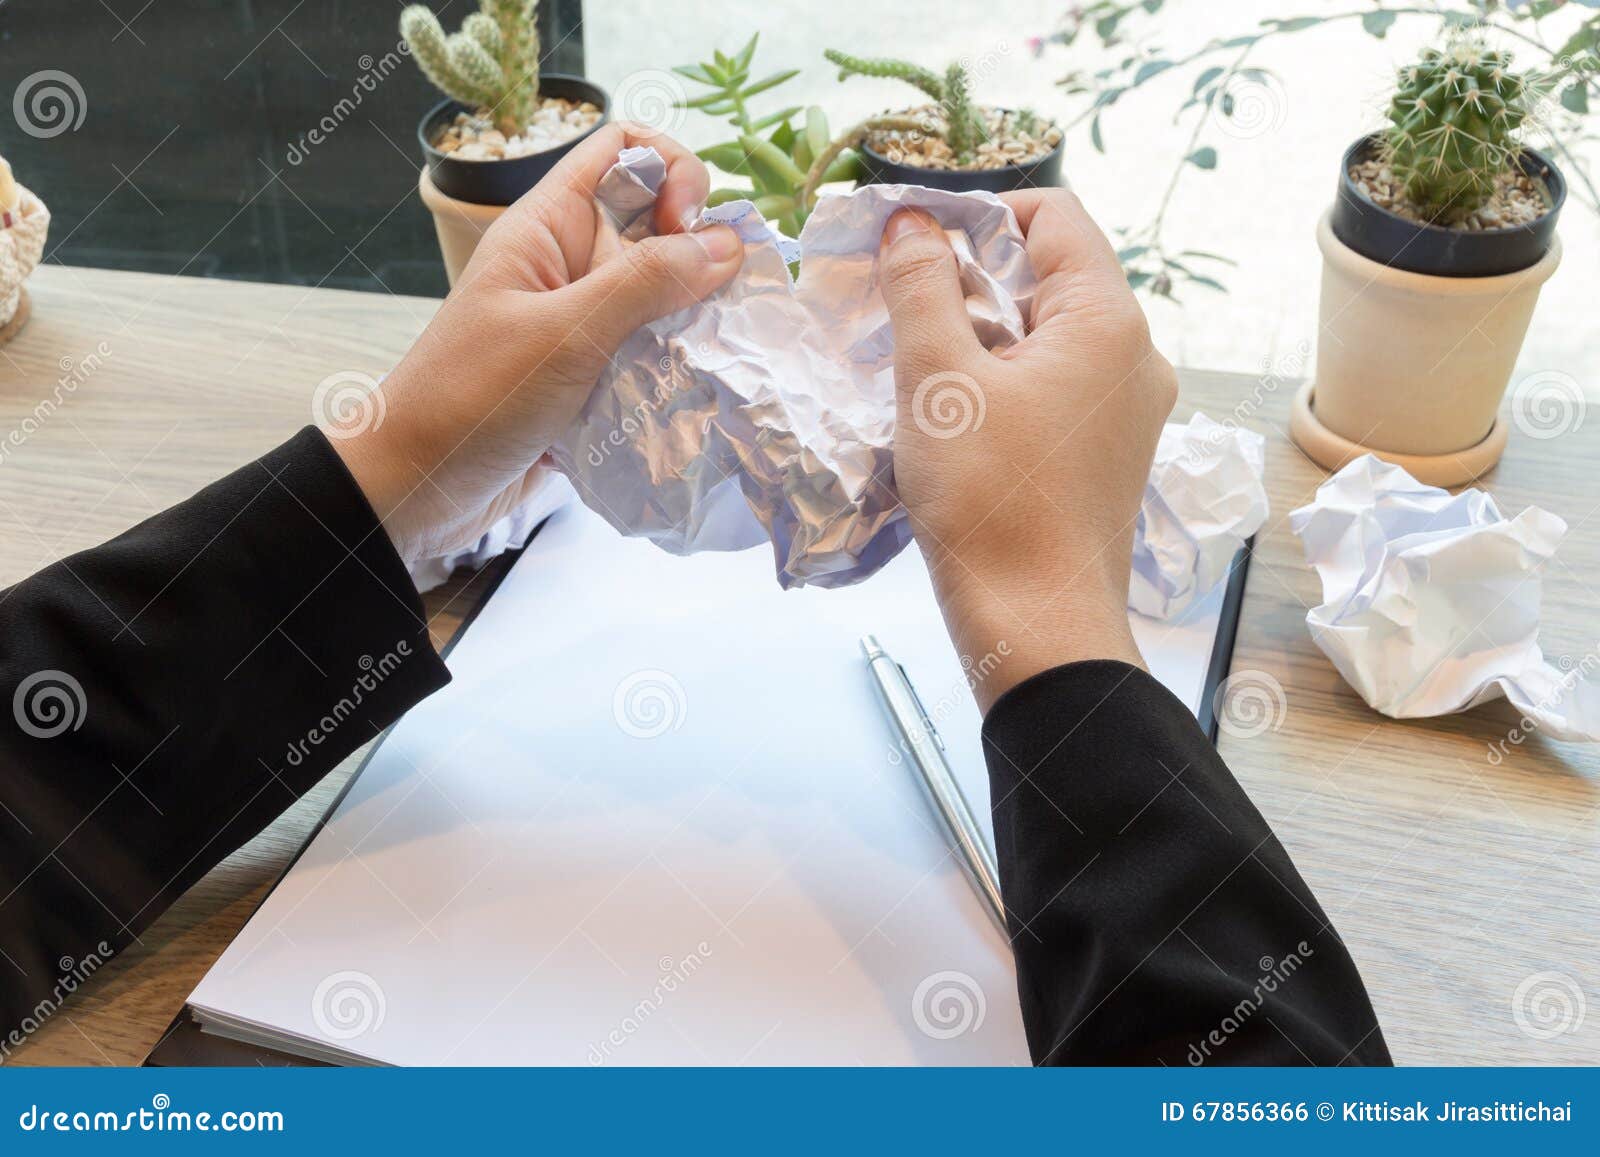 paper businesswoman tearing crumpled ball another preview